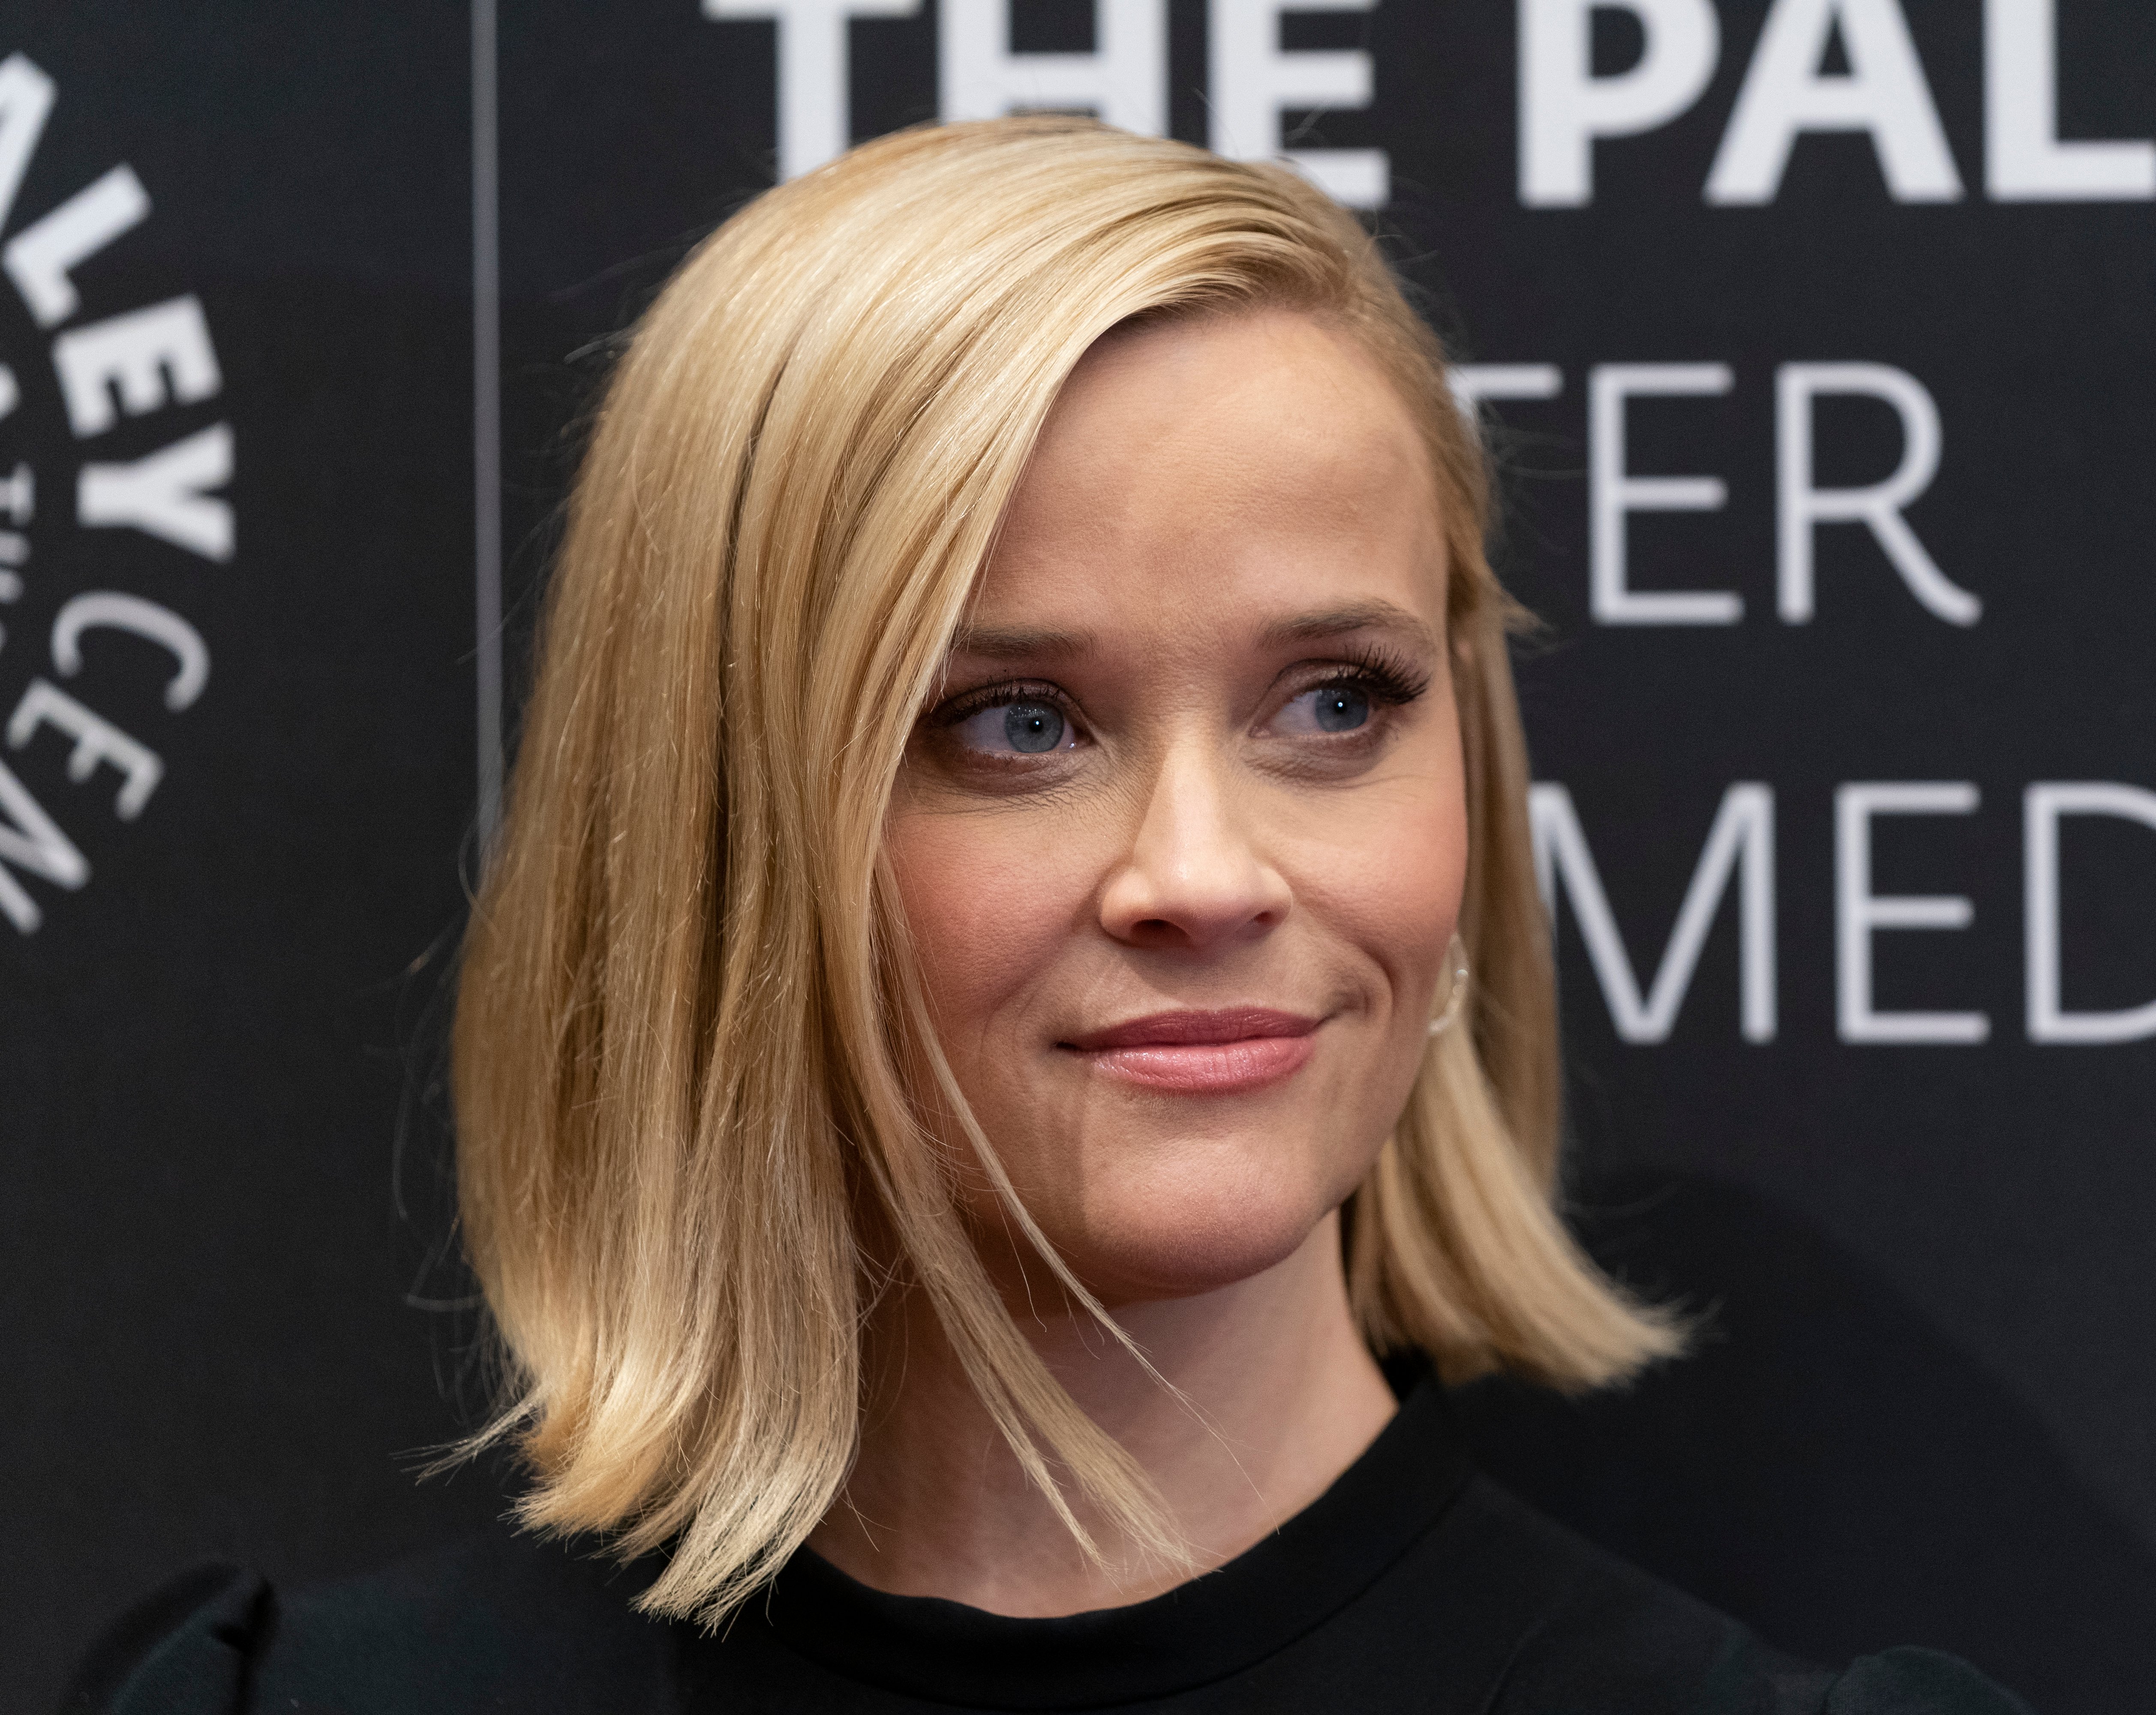 Reese Witherspoon attends Paley Live NY: Apple TV The Morning Show Preview Screening at Paley Center for Media | Photo: Shutterstock